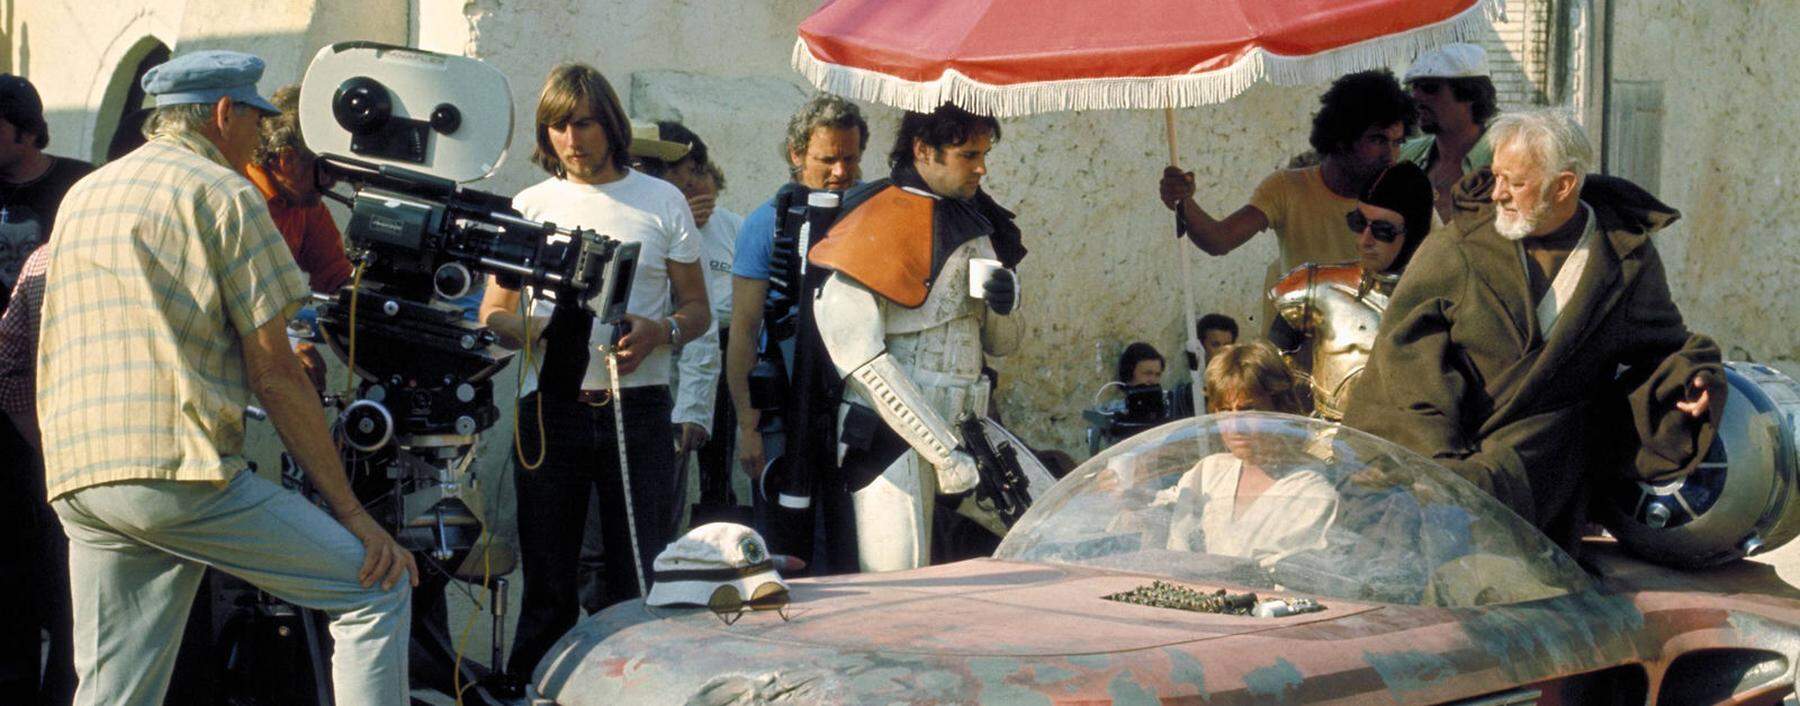 Shooting the Jedi mind trick sequence in Tunisia in Star Wars Episode IV A New Hope 1977 Hollywoo